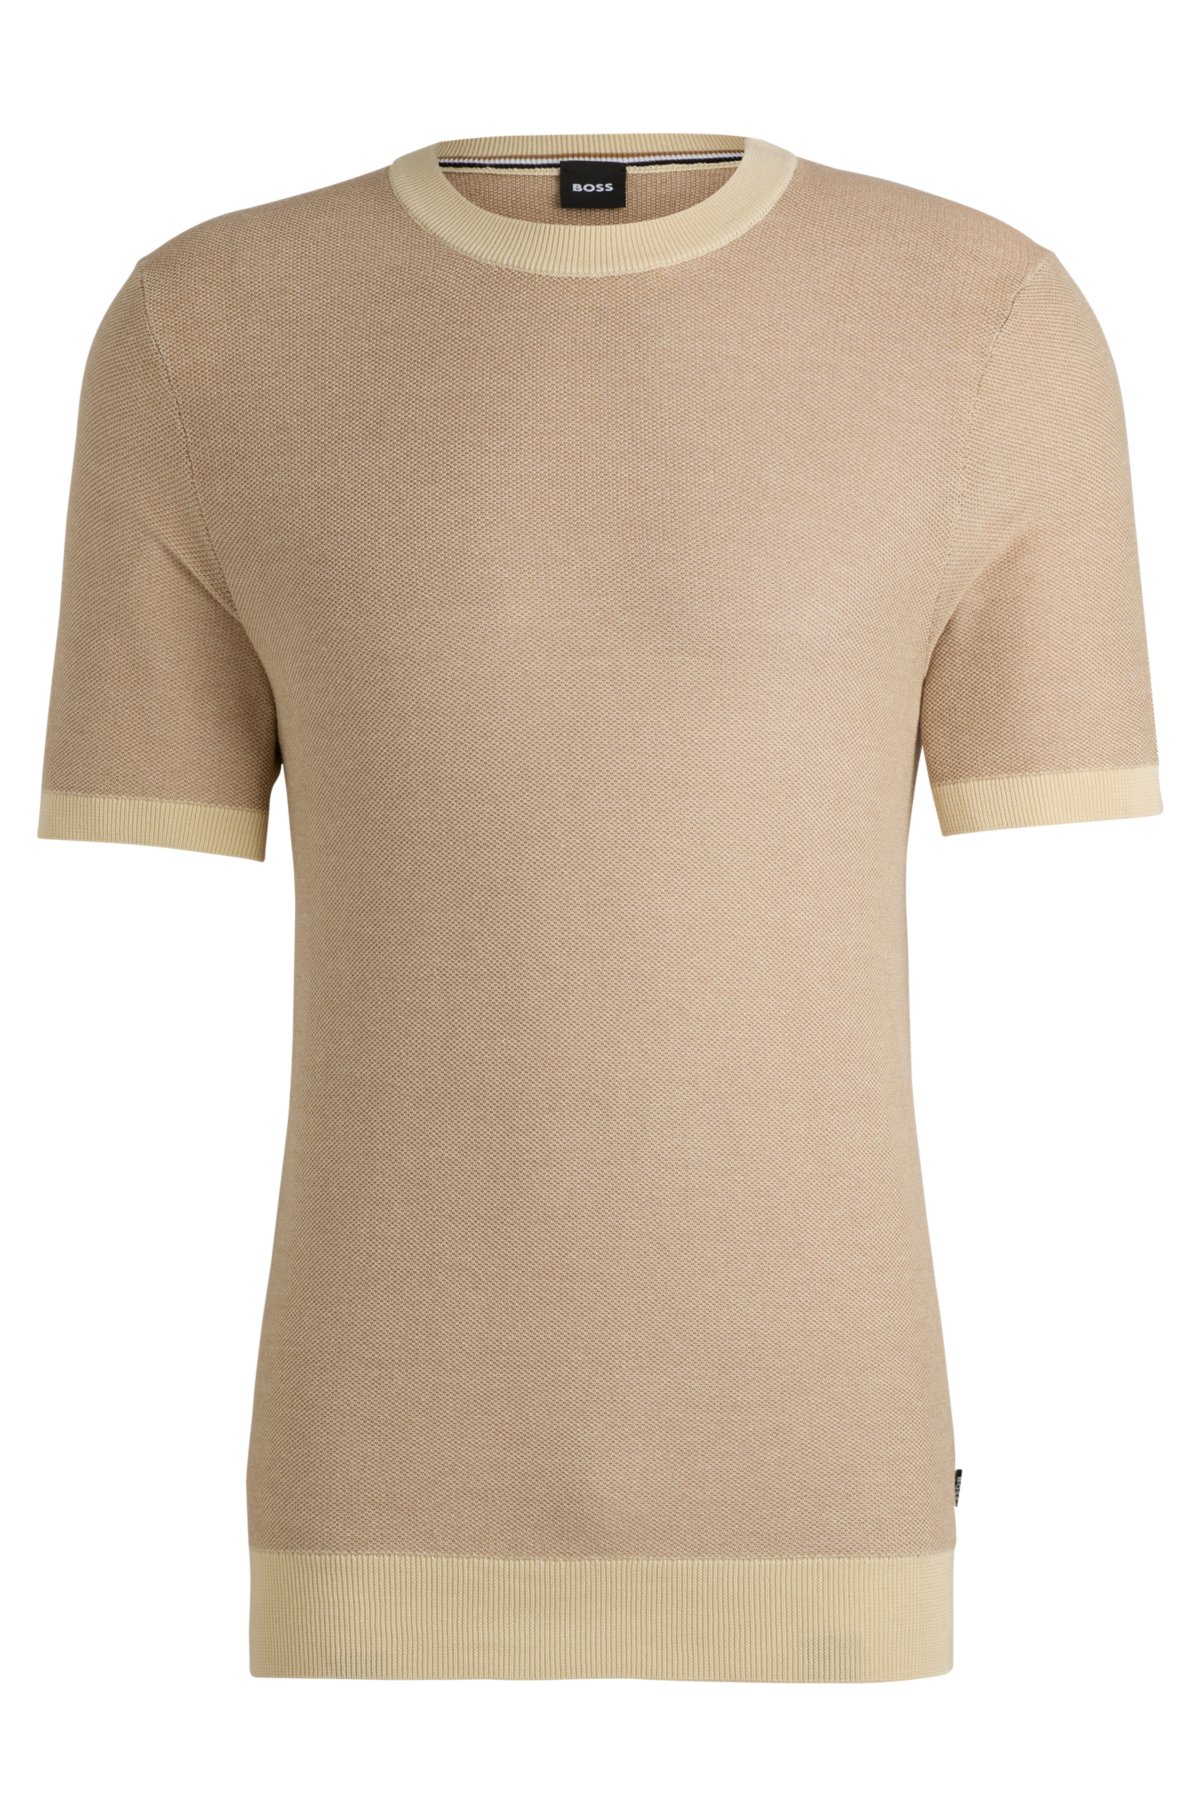 Short-sleeved cotton-blend sweater with micro structure, Light Beige